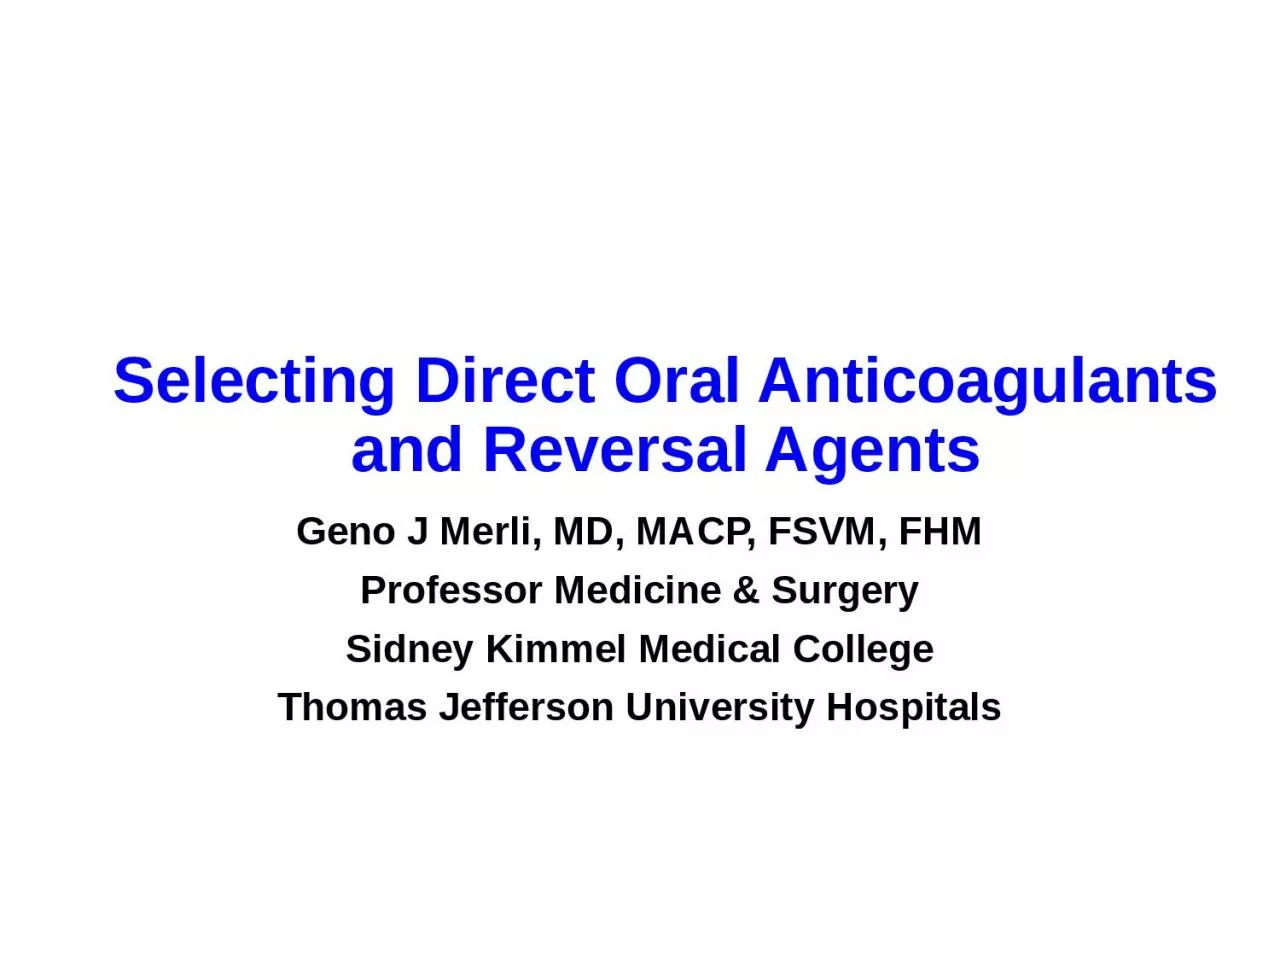 Selecting Direct Oral Anticoagulants and Reversal Agents